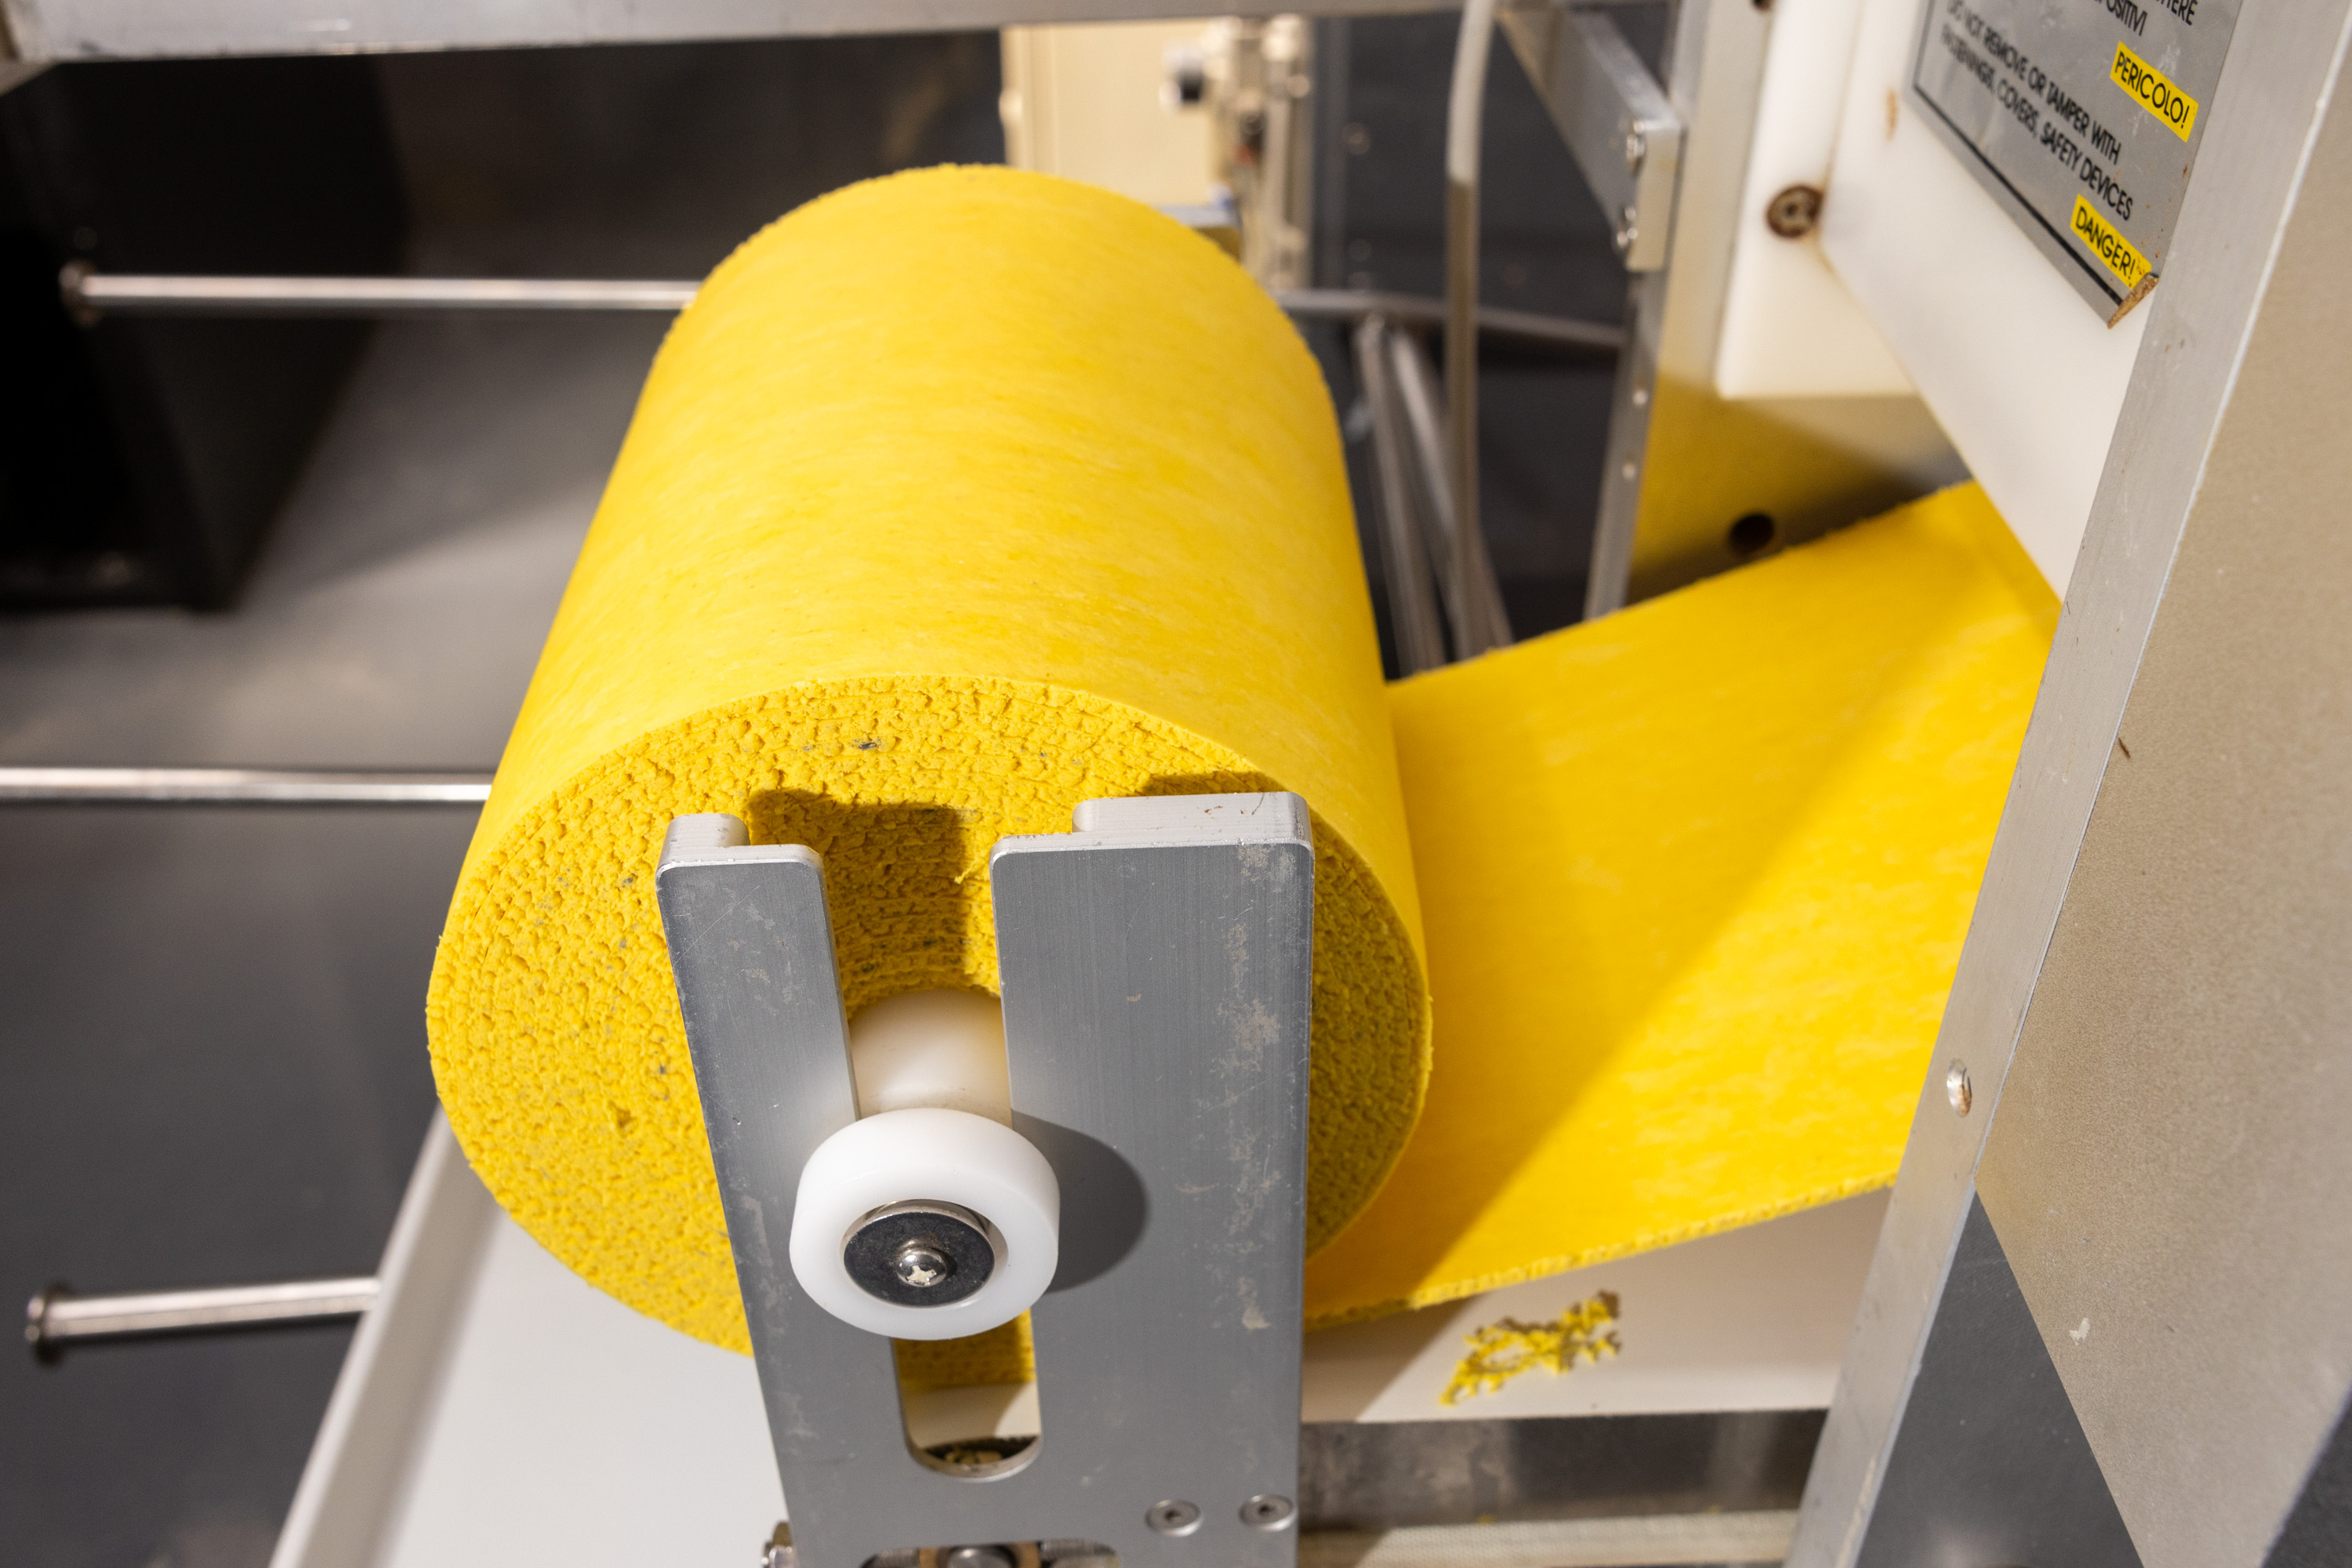 The image shows a large yellow roll of material mounted on a metal dispenser, with the material being fed through the machine, possibly for processing or cutting.